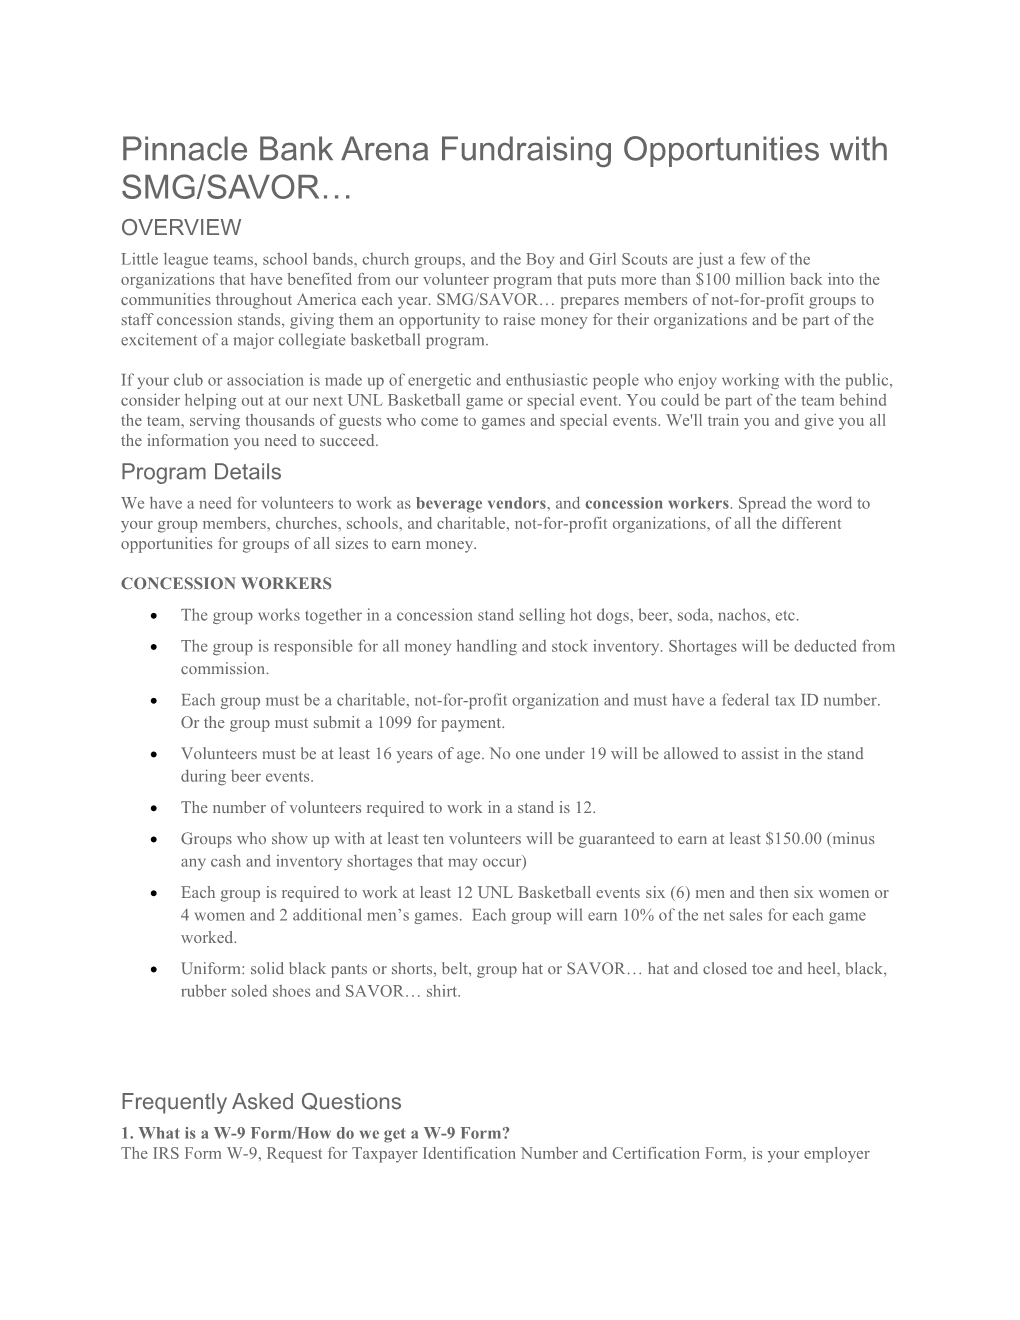 Pinnacle Bank Arena Fundraising Opportunities with SMG/SAVOR